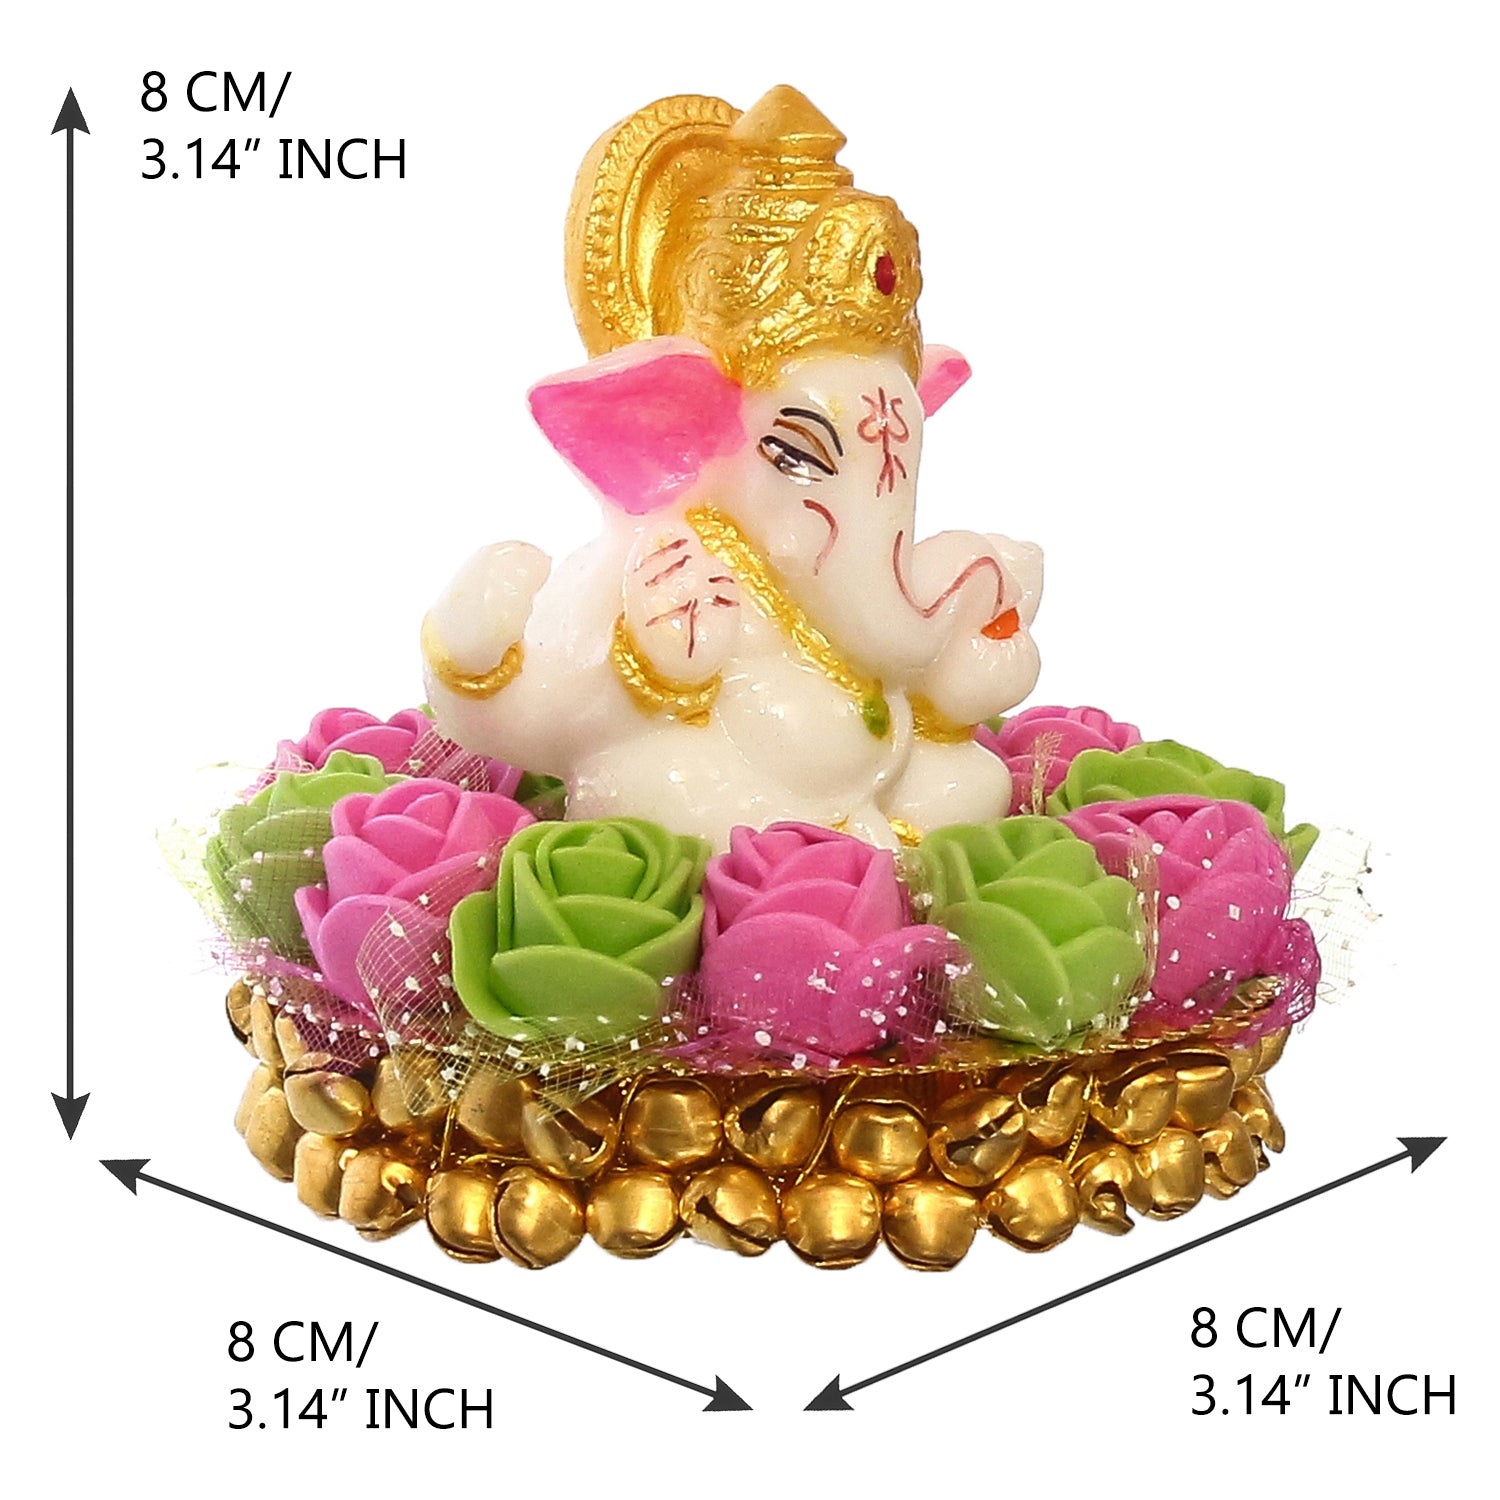 Golden and White Polyresin Lord Ganesha Idol on Decorative Pink and Green Flowers Plate 3